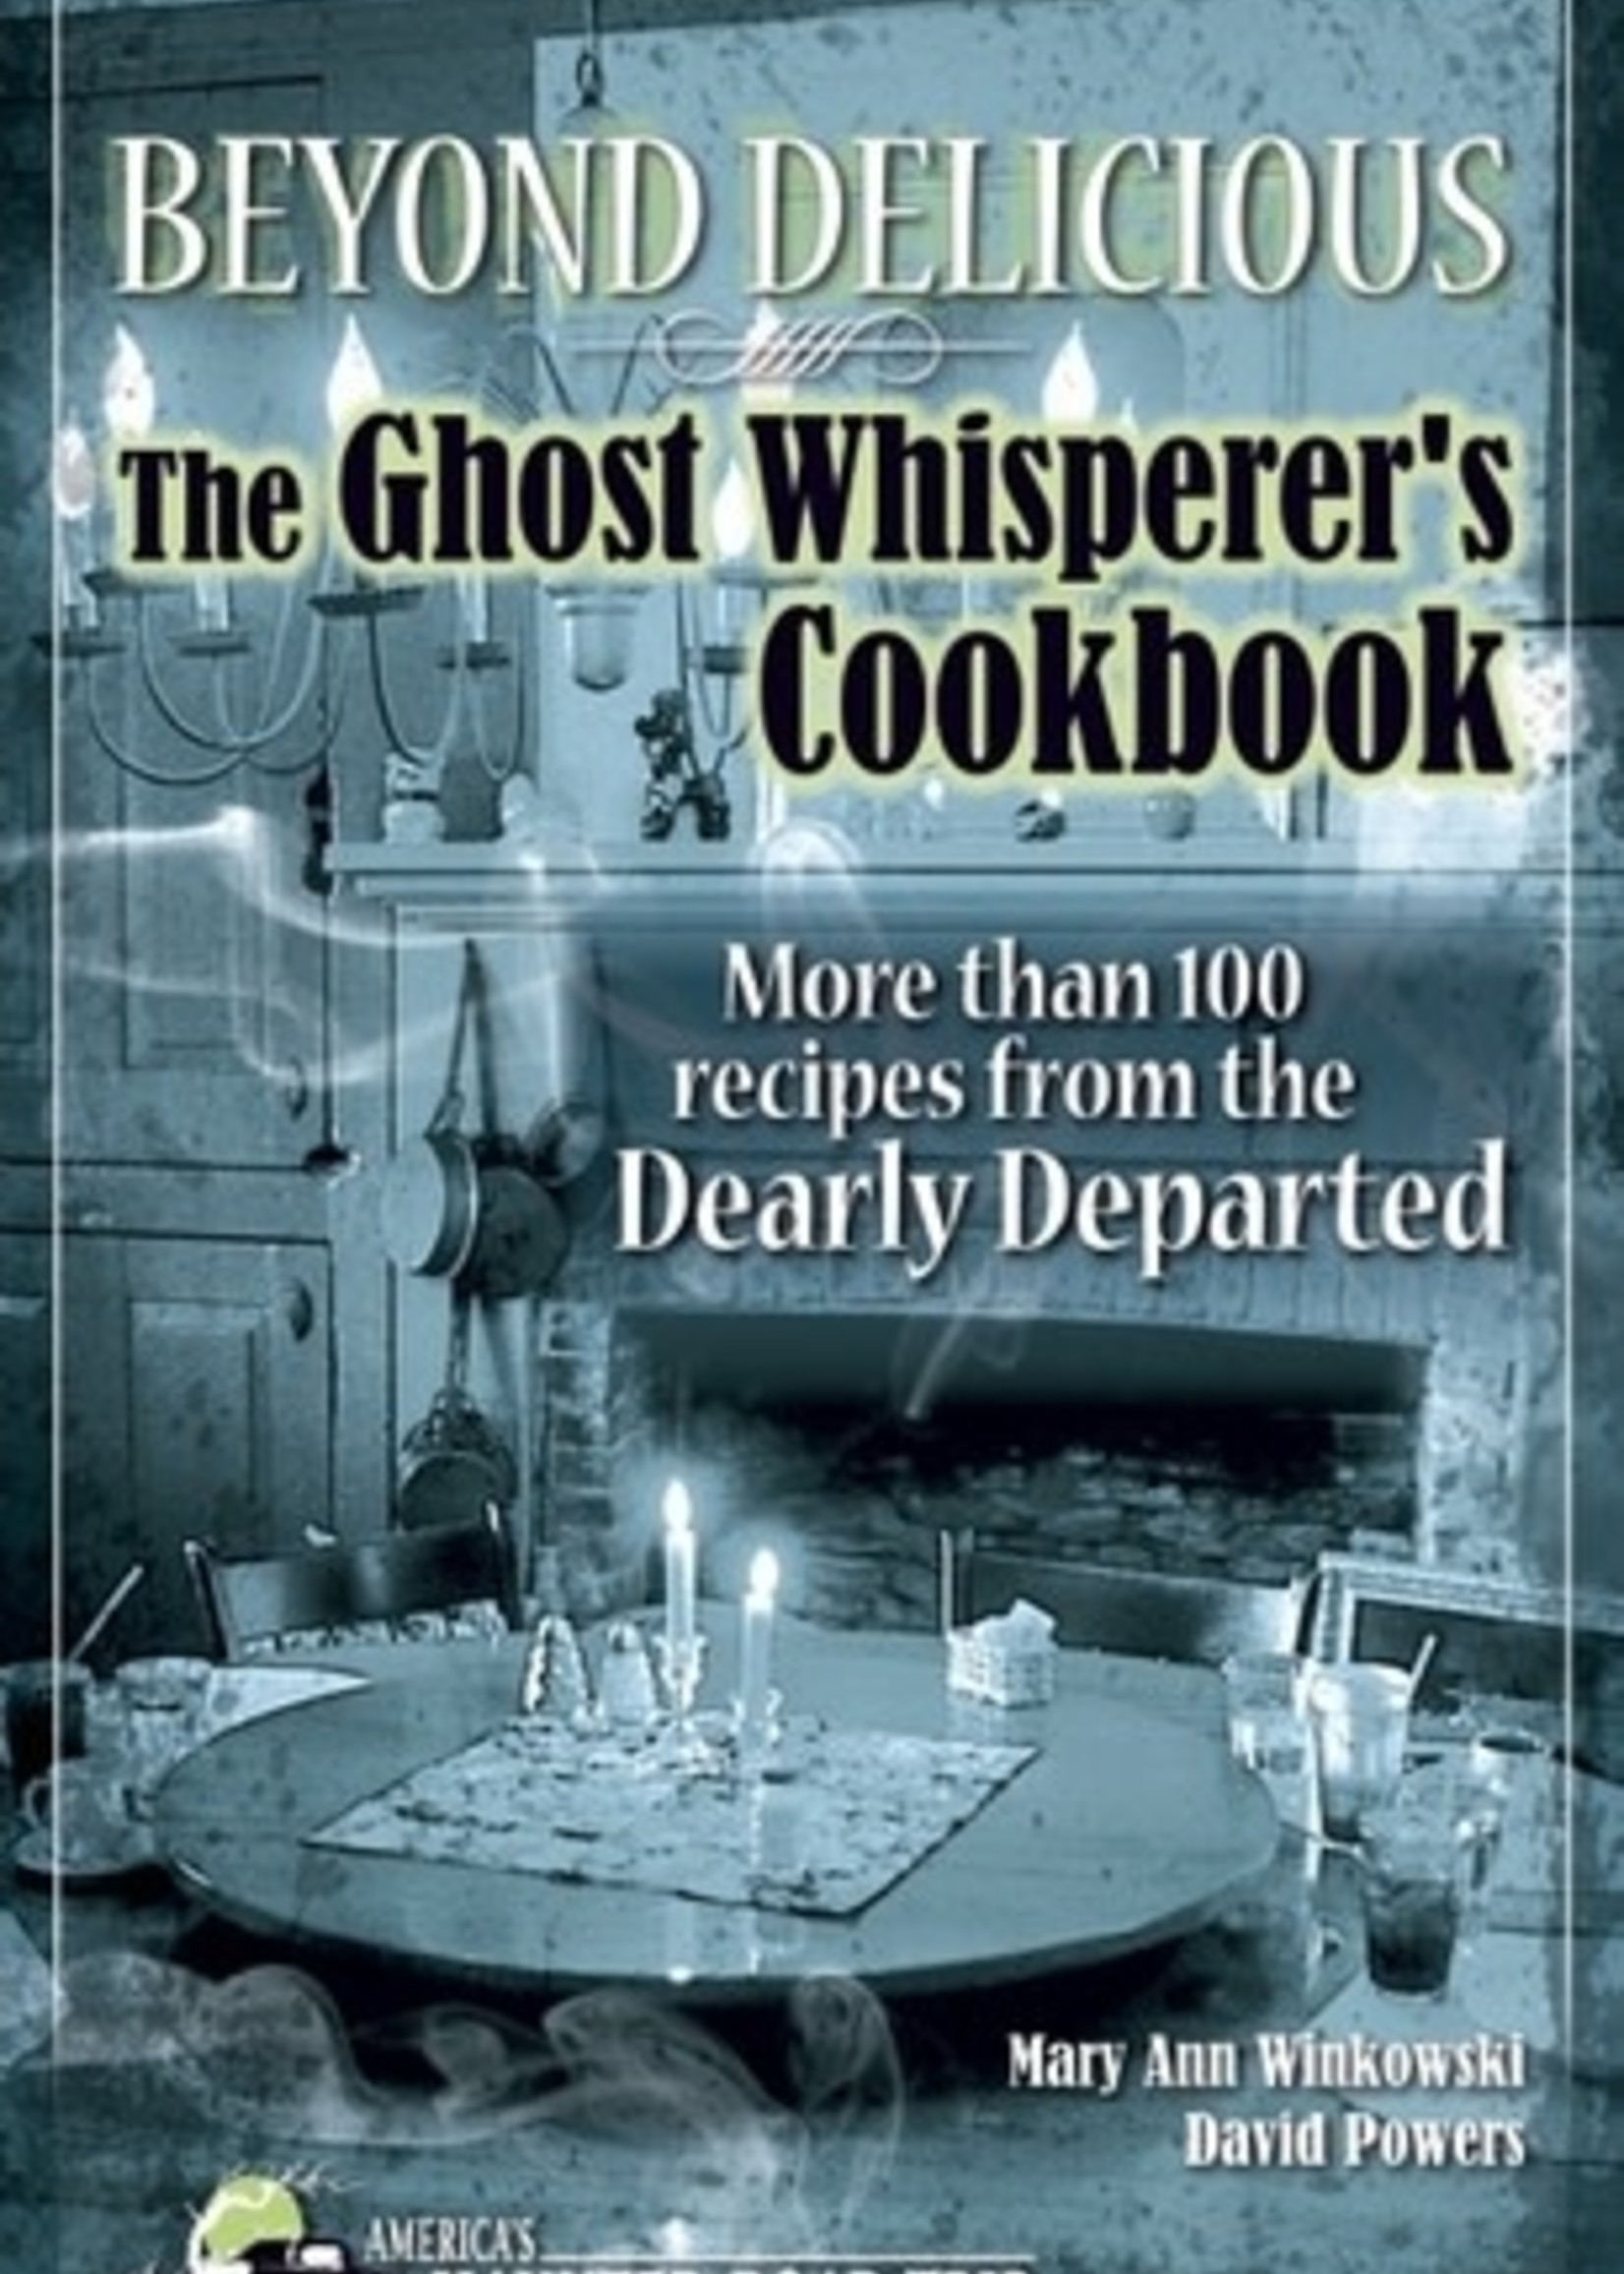 Beyond Delicious: The Ghost Whisperer's Cookbook: More than 100 Recipes from the Dearly Departed by Mary Ann Winkowski, David Christopher, David Powers